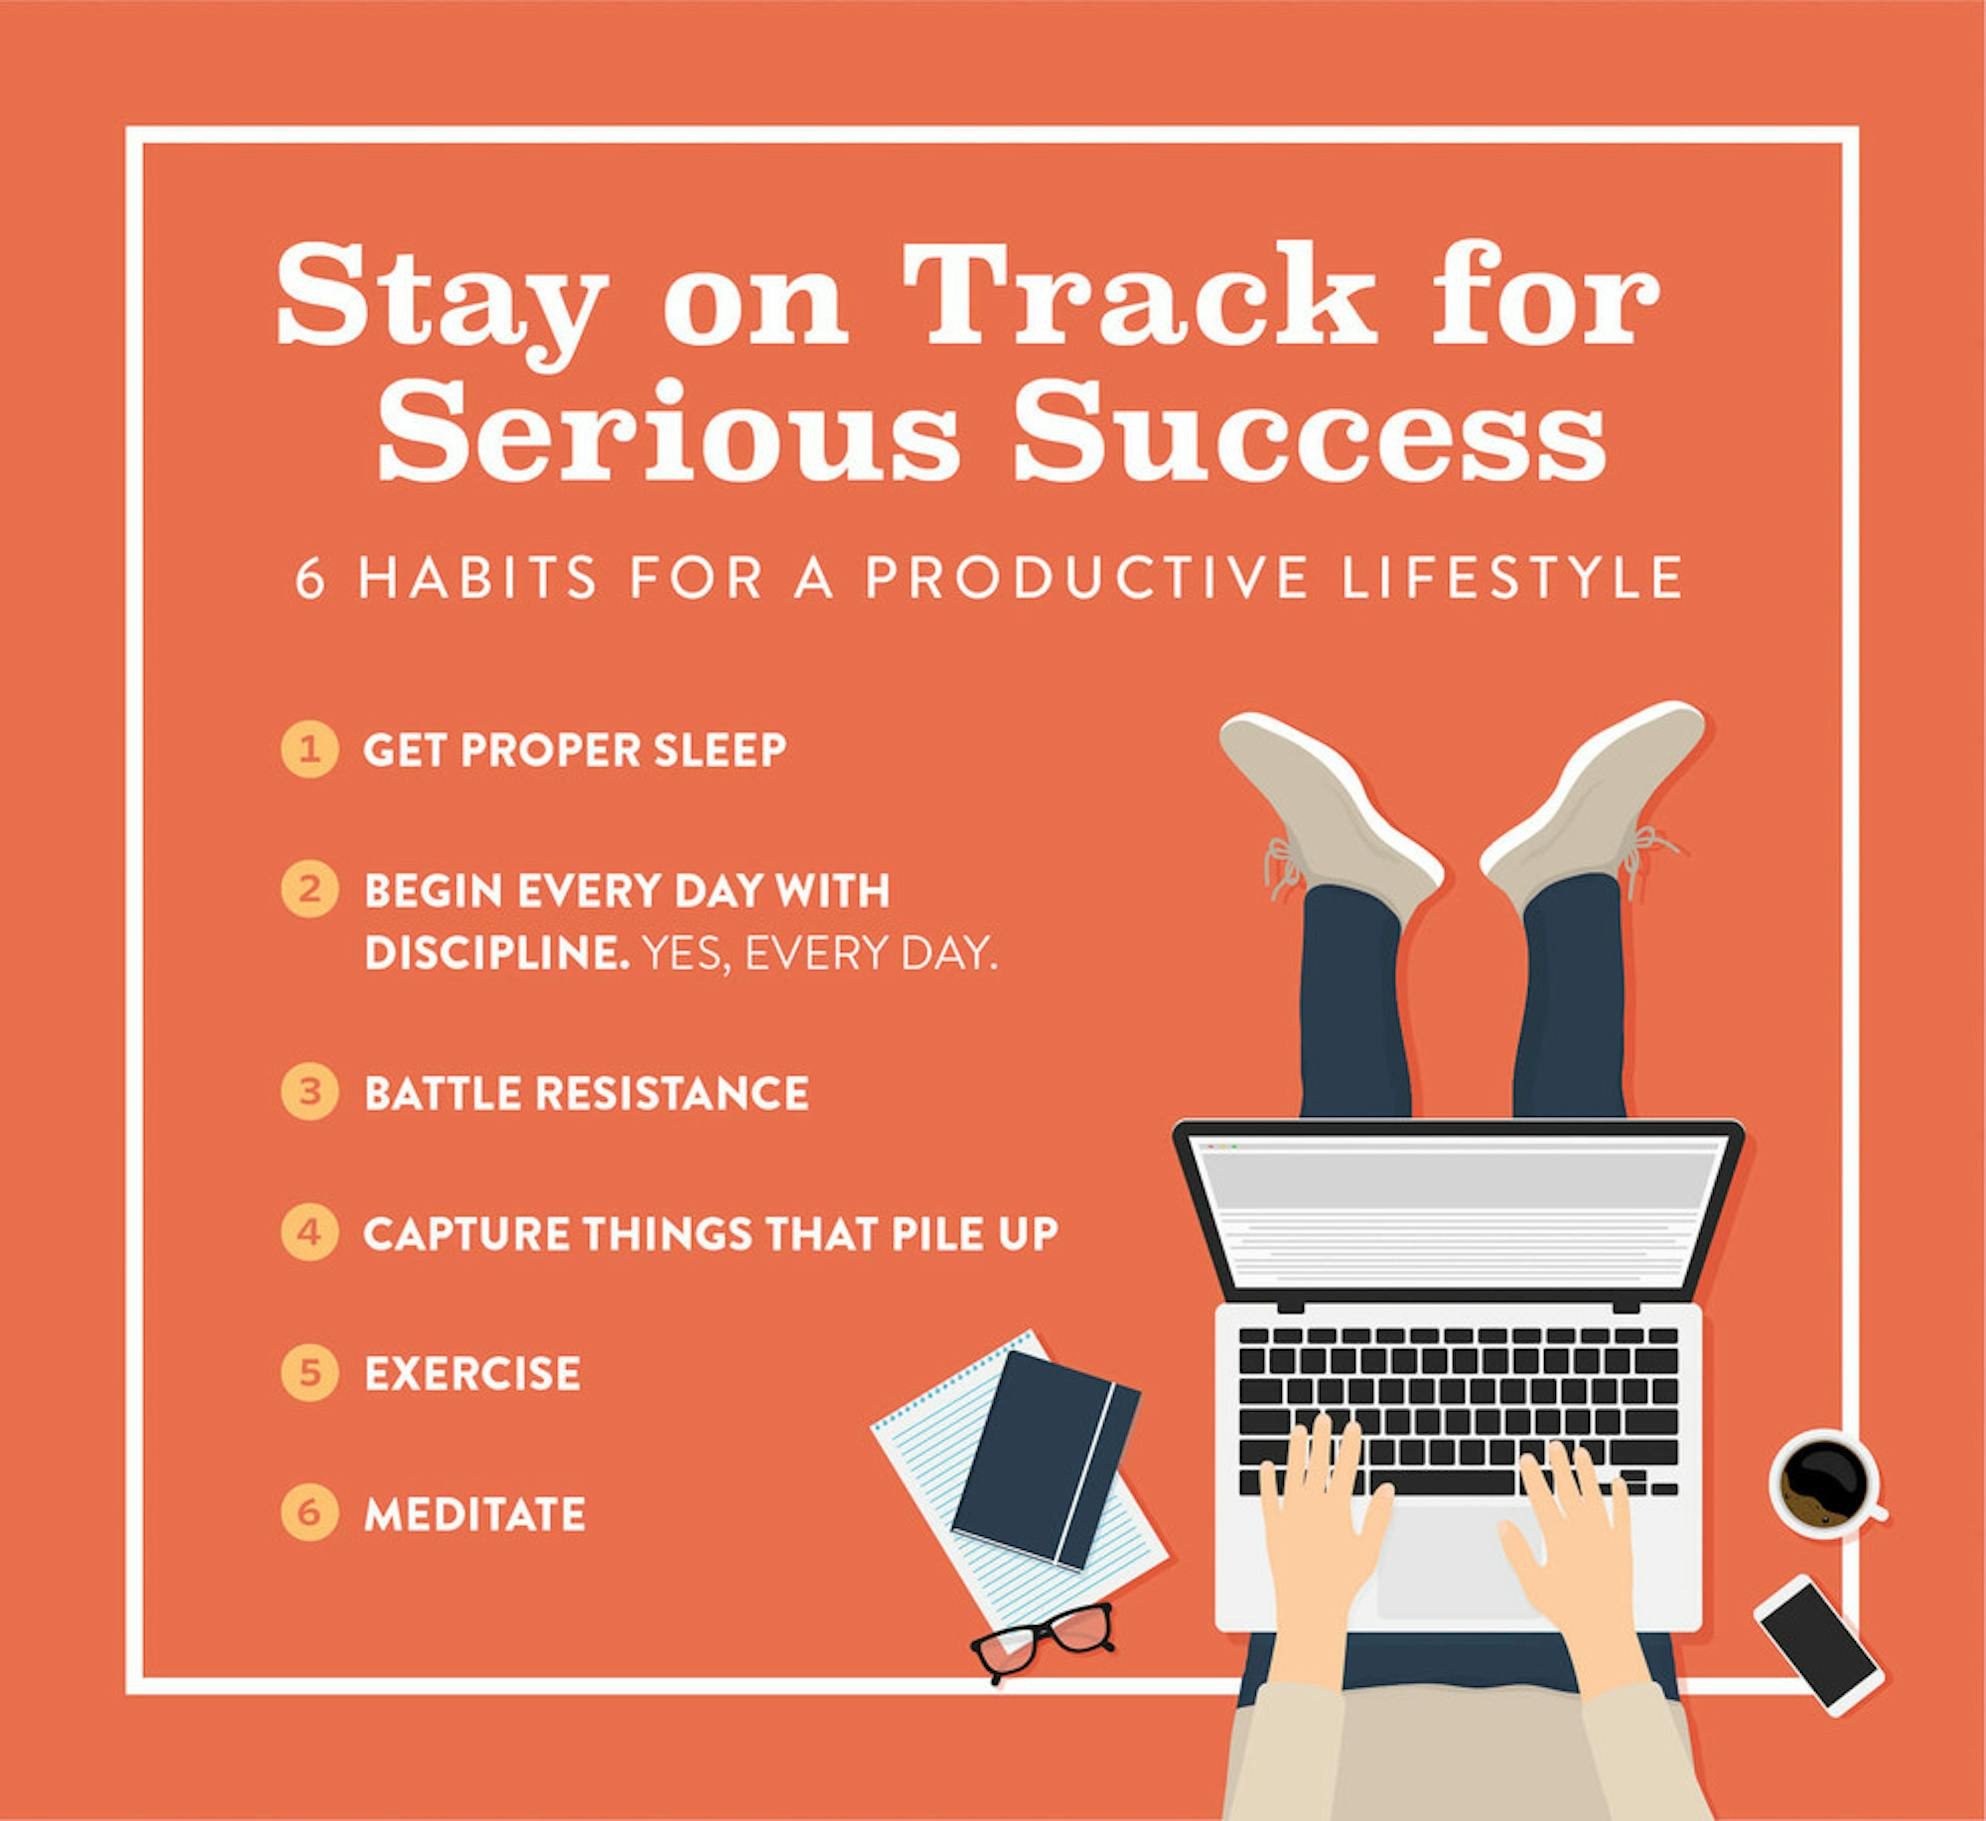 A list of 6 habits for a productive lifestyle and success